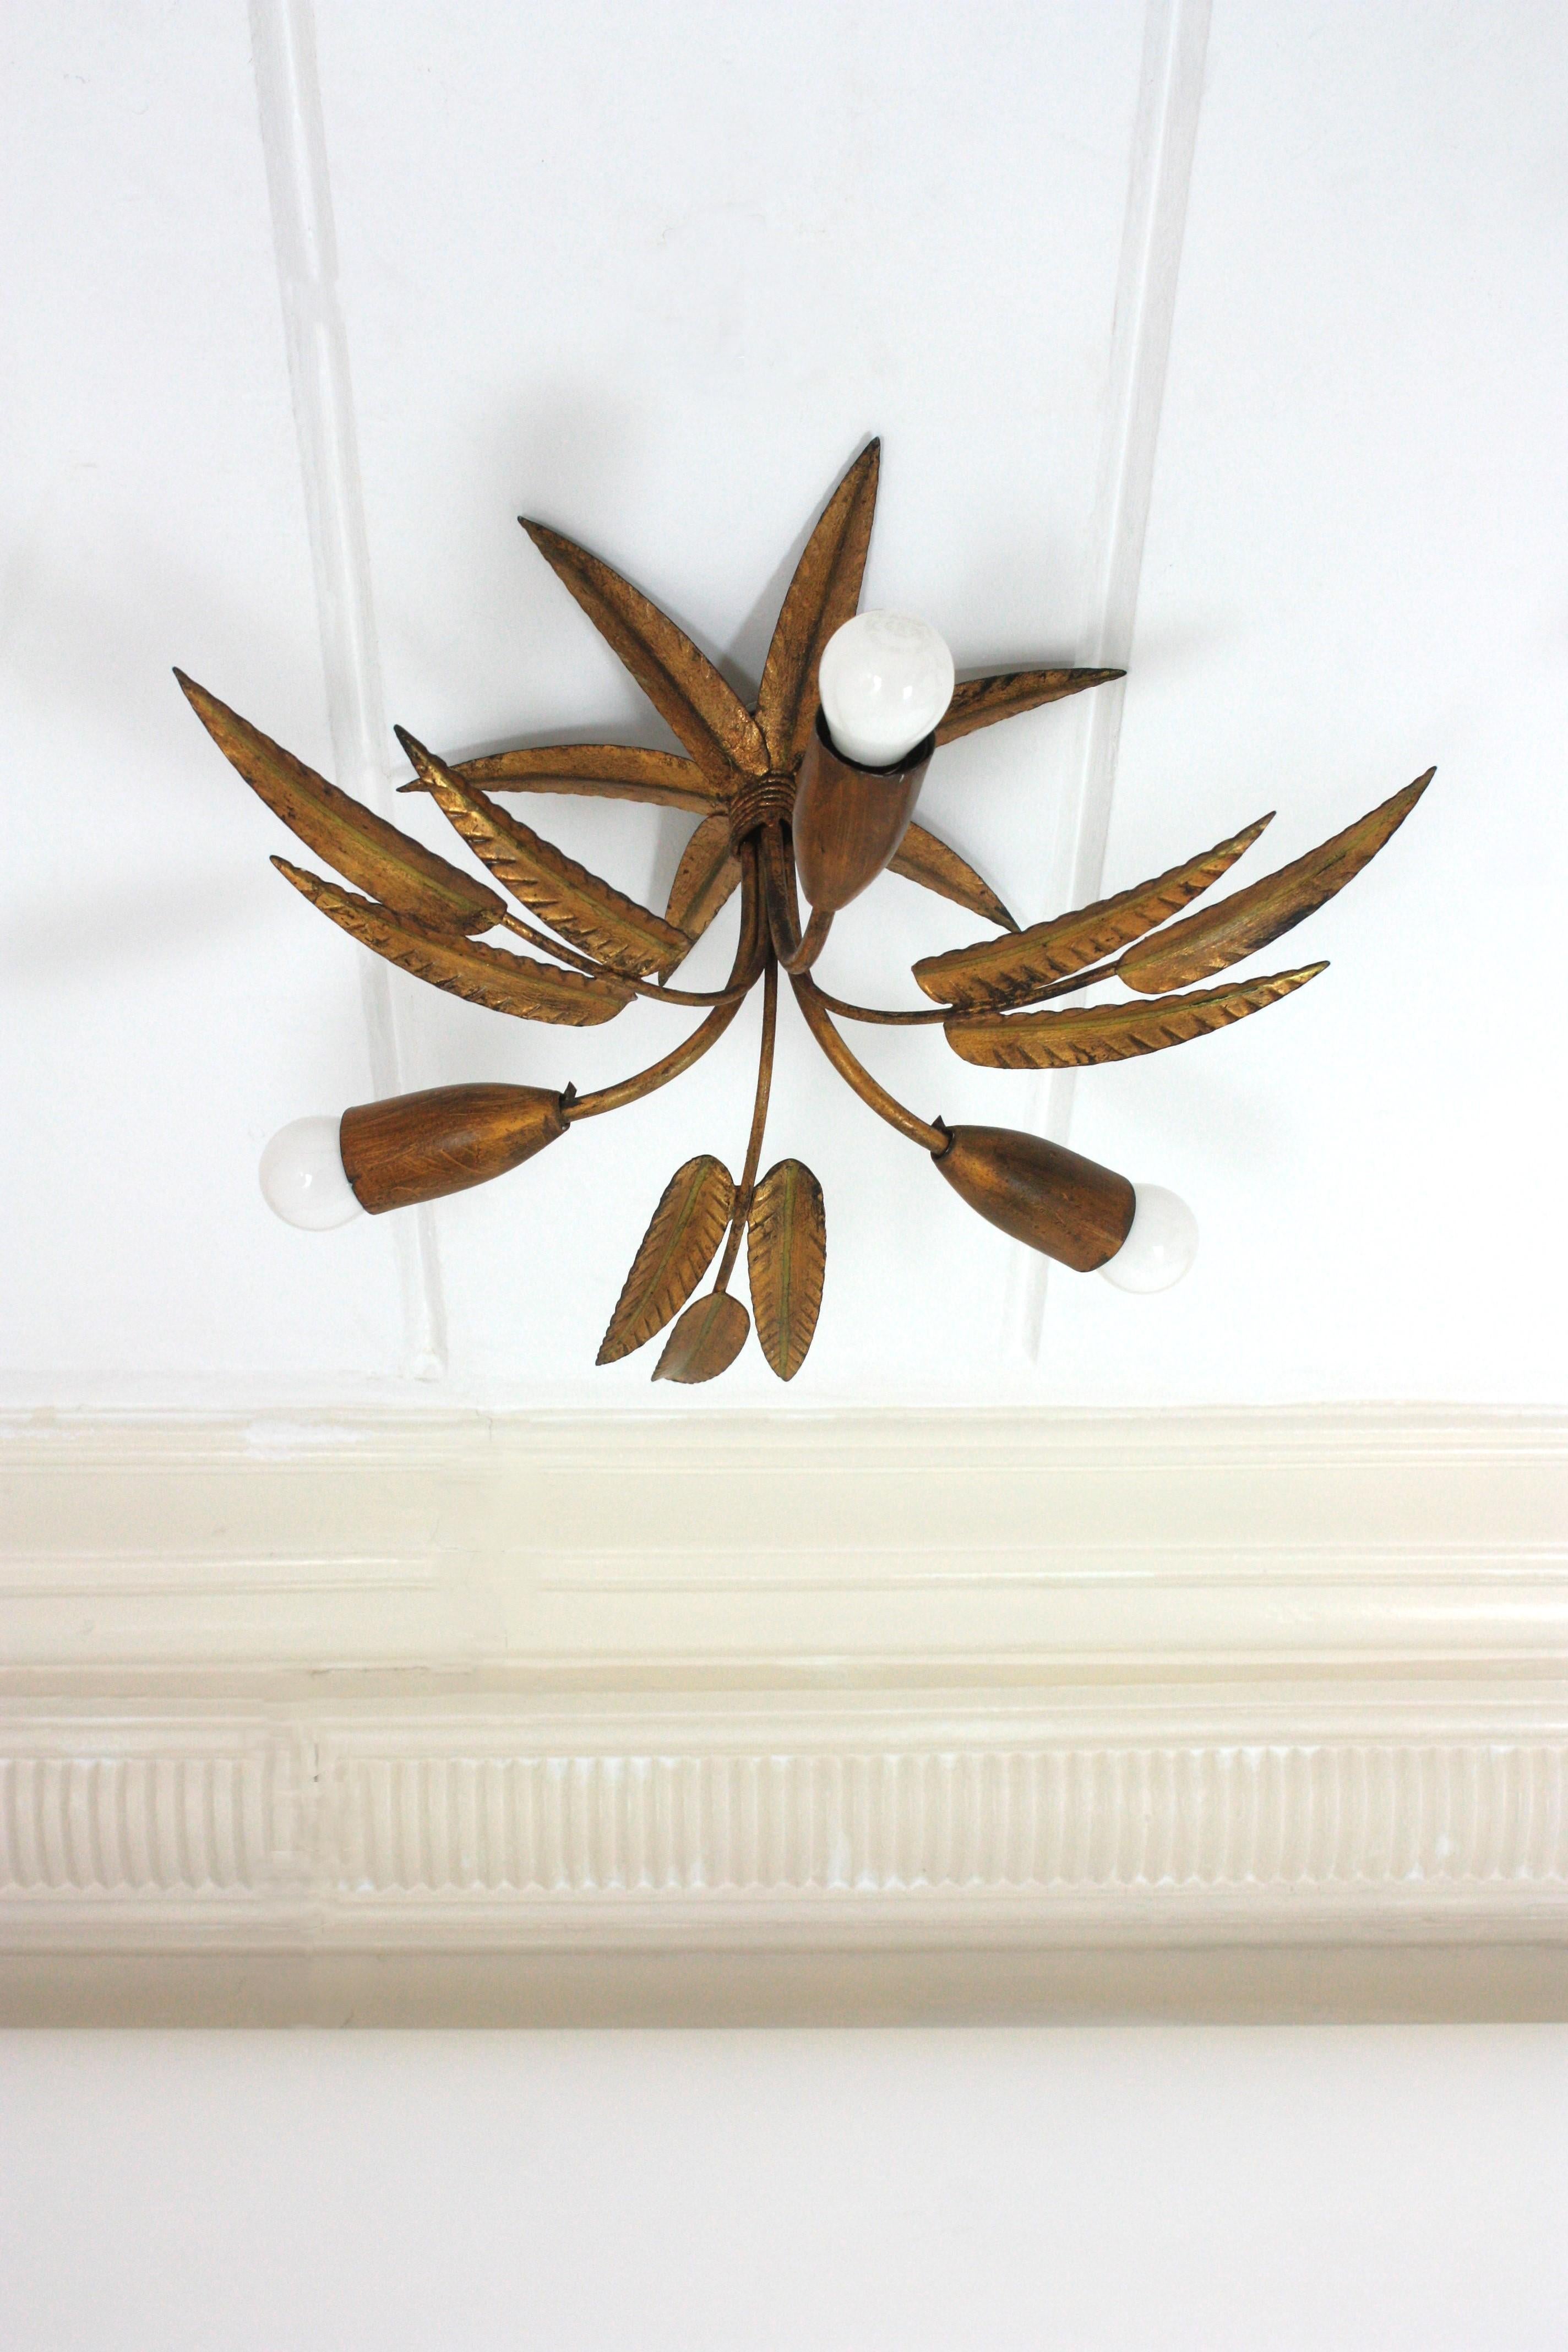 Pair of Palmette Chandeliers or Pendants in Gilt Iron with Leaves Design In Good Condition For Sale In Barcelona, ES